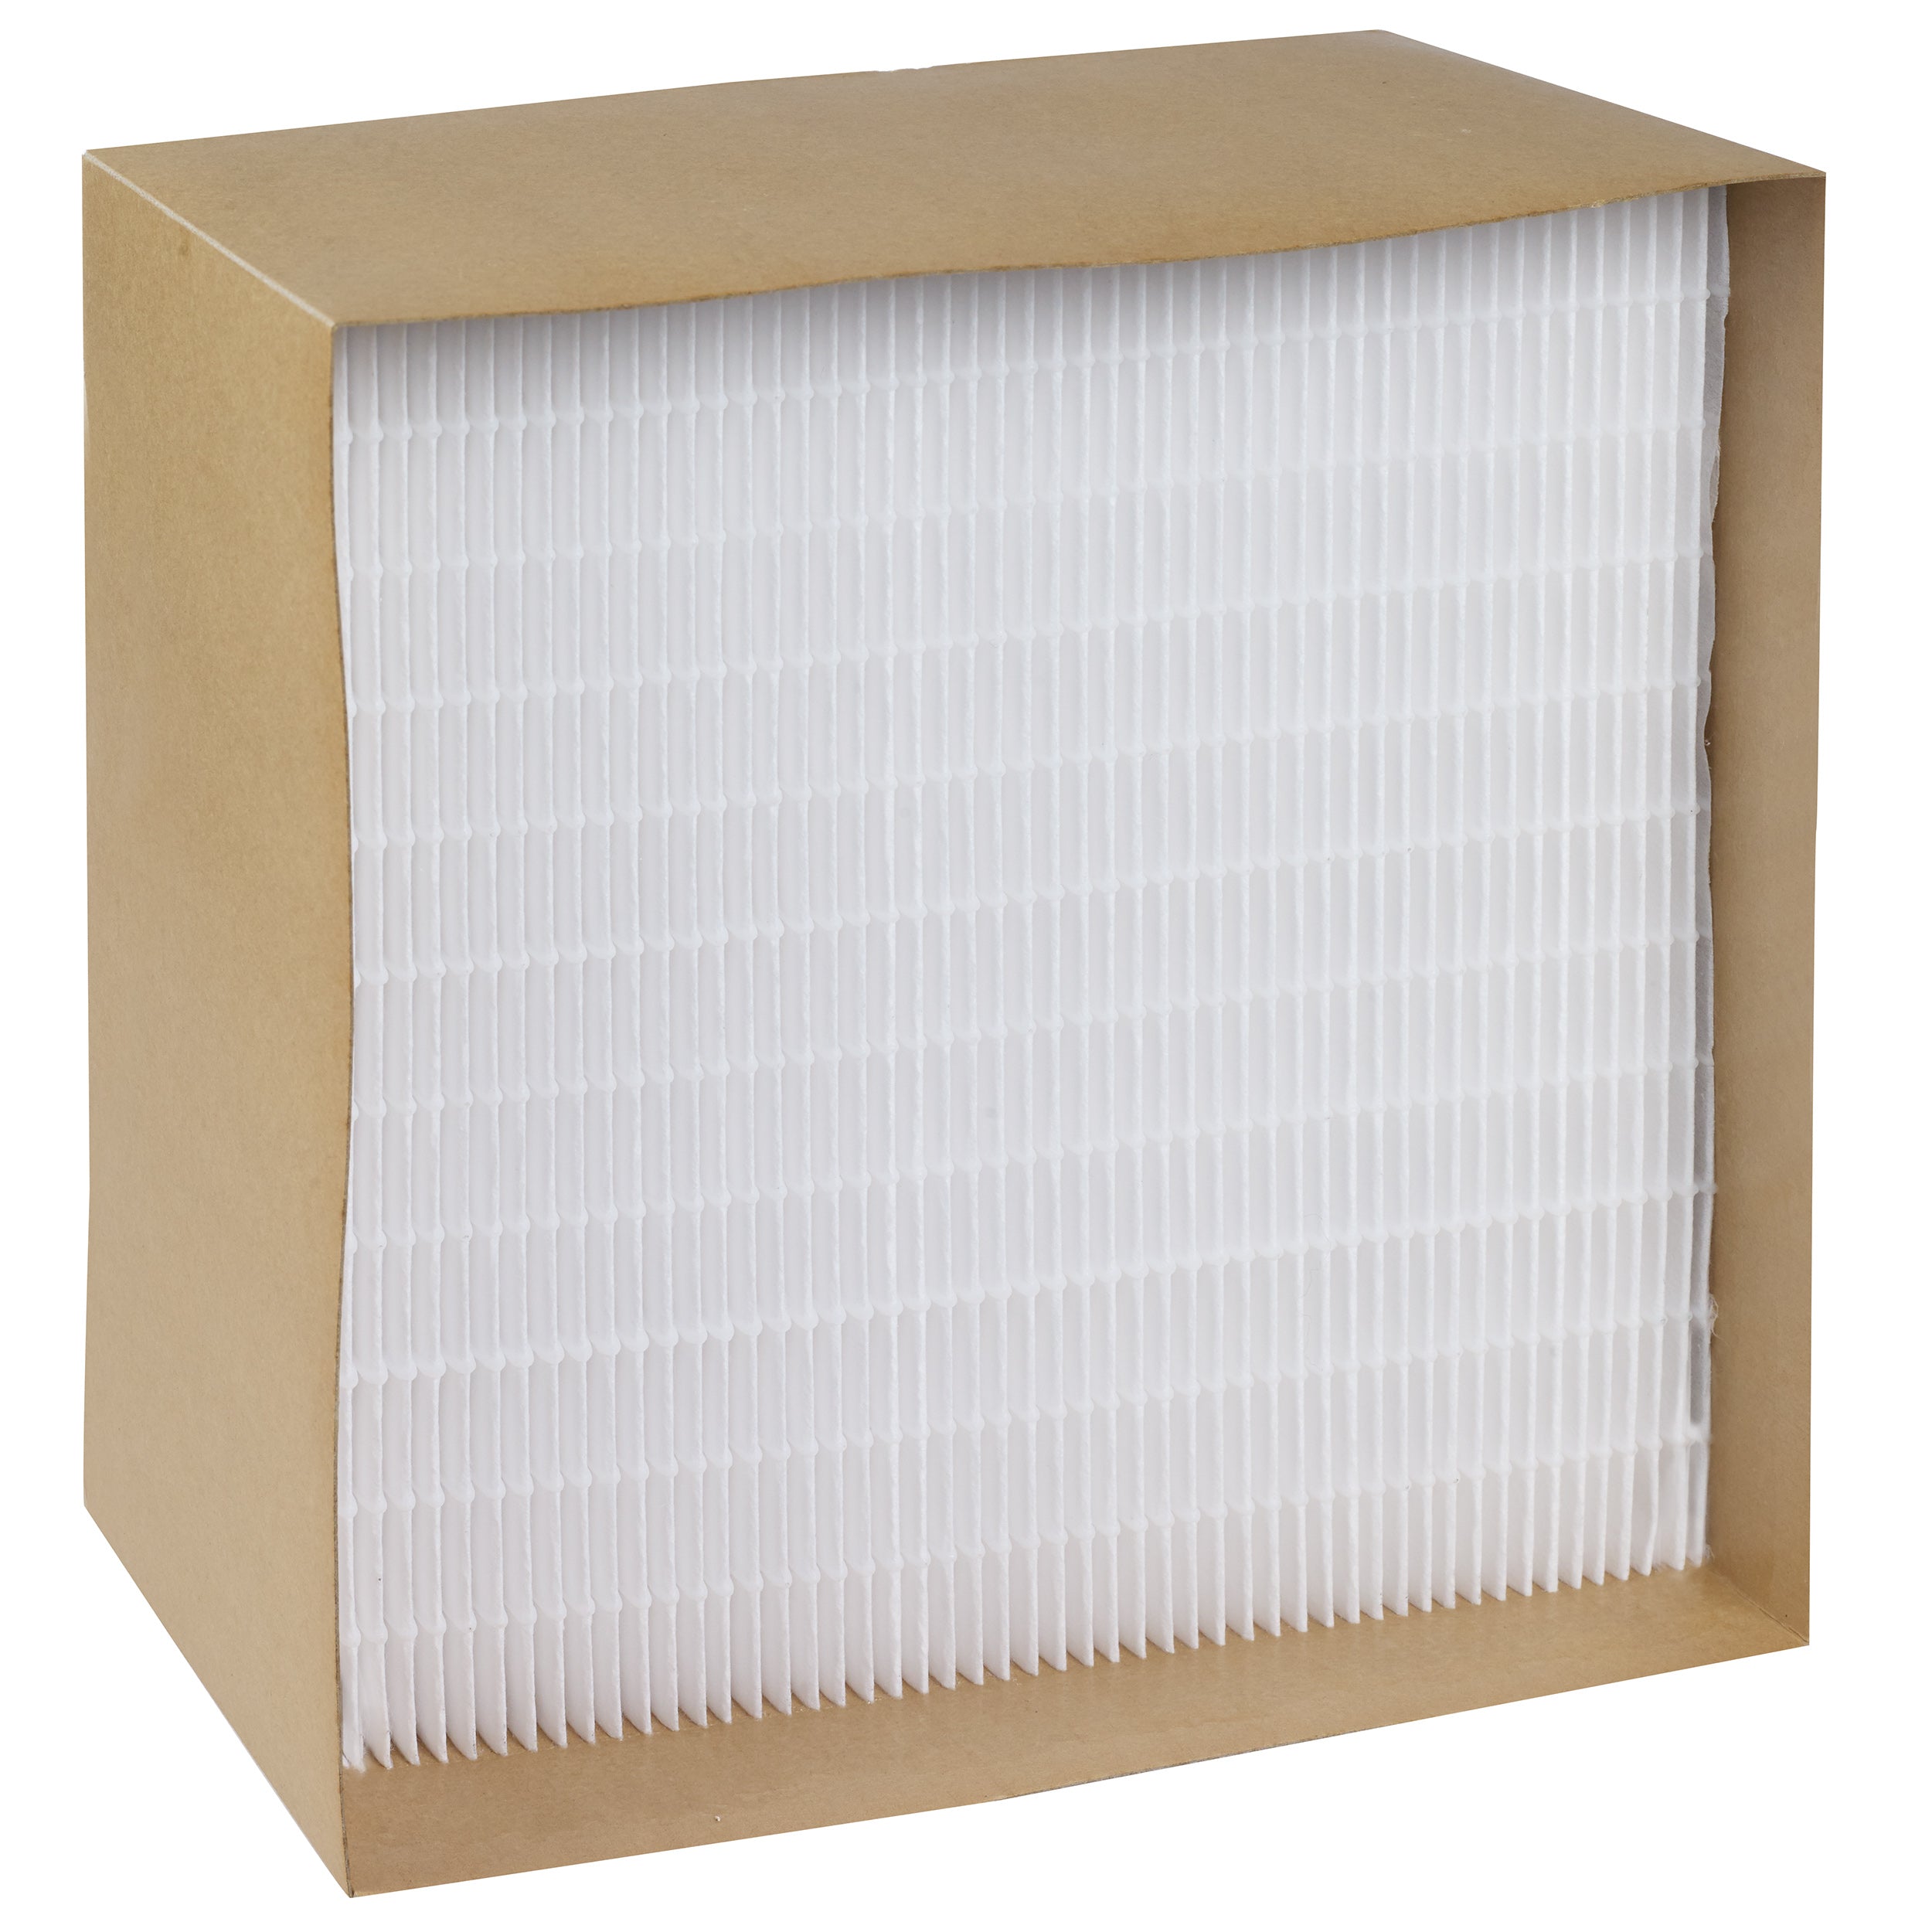 Smartvent filters $60 why pay $100